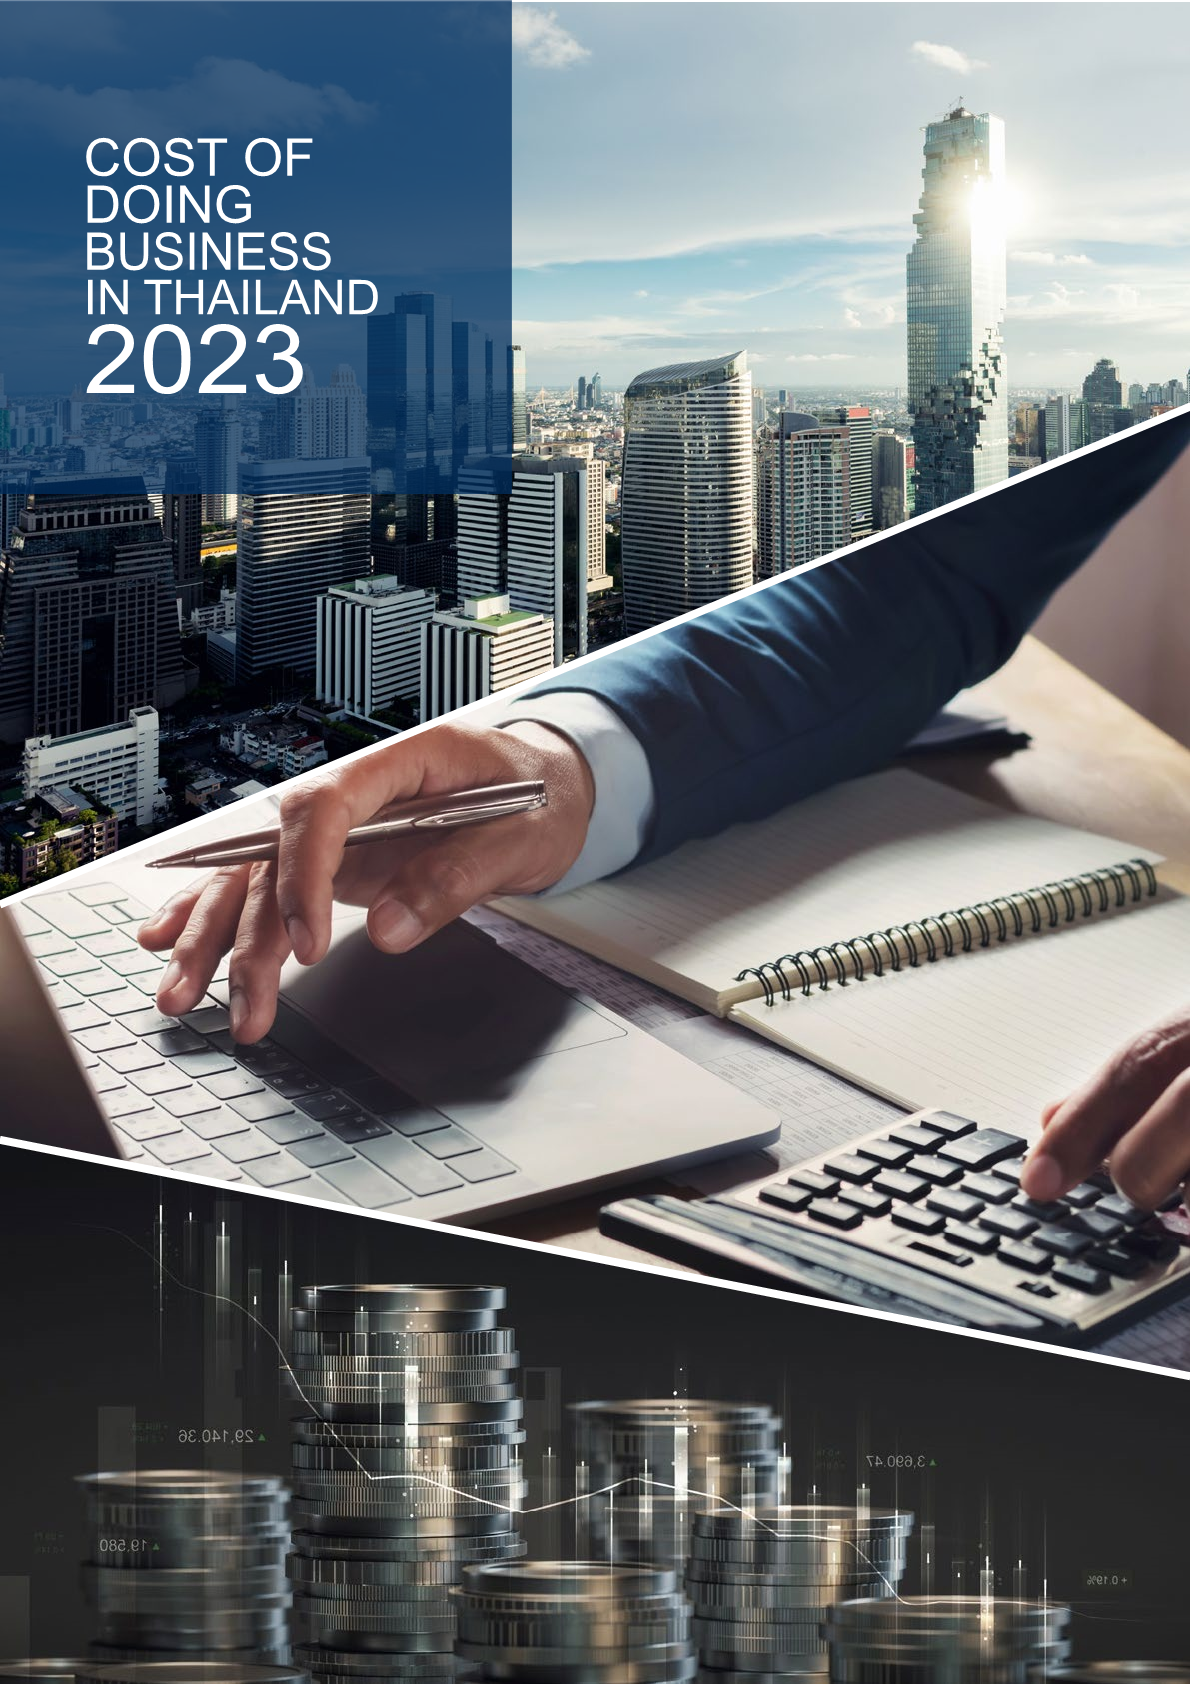 COST OF DOING BUSINESS IN THAILAND 2023